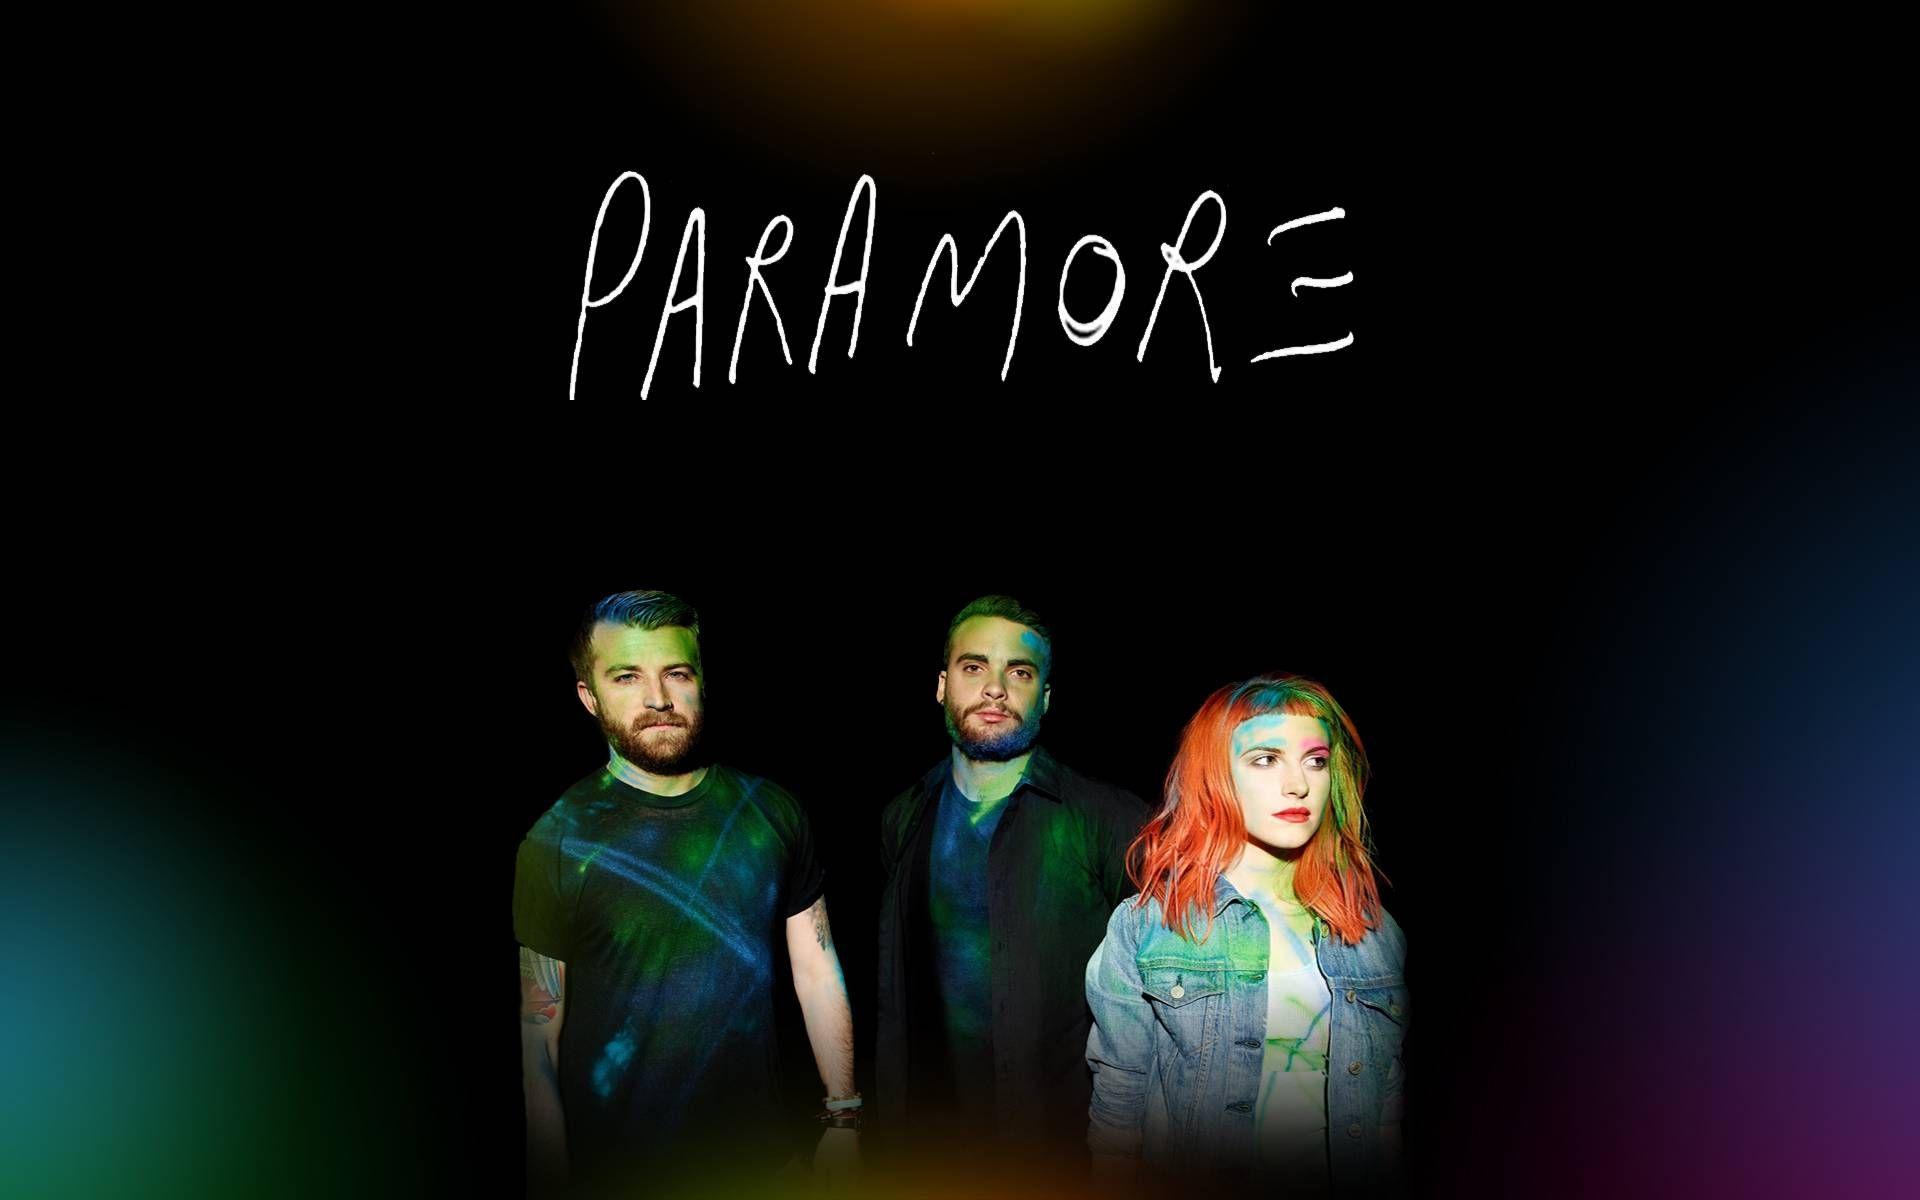 Wallpaper and Picture WP.43: Paramore, Magnificent Image